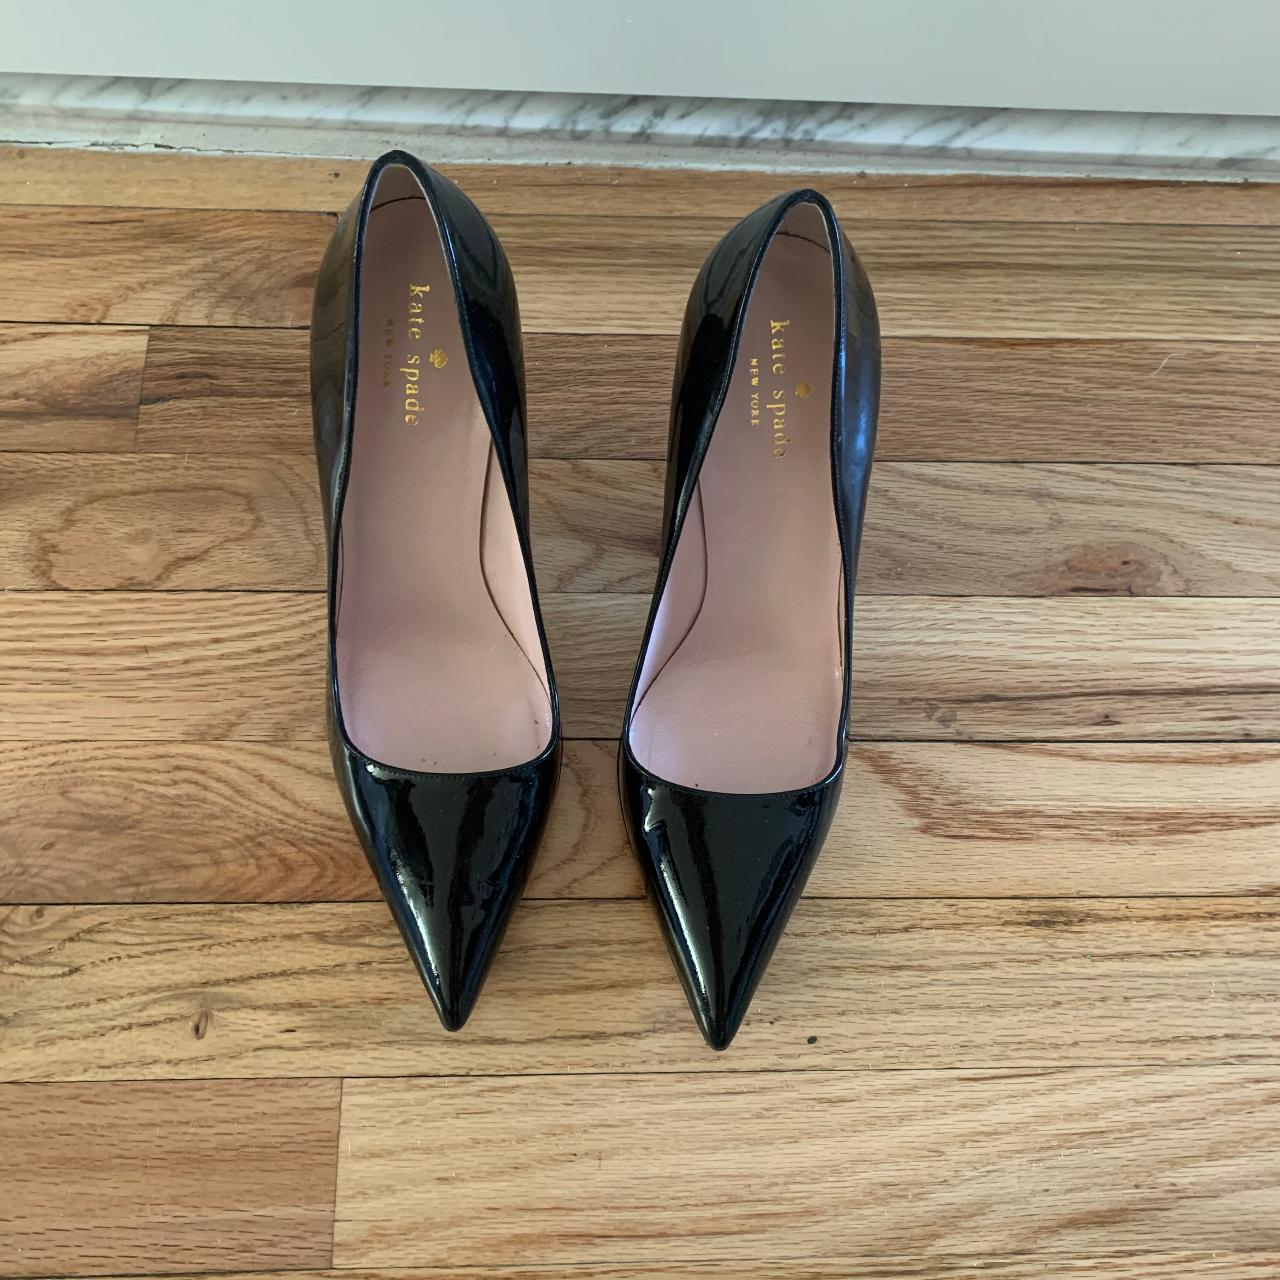 Kate Spade patent leather pumps. Size 9. 3.5